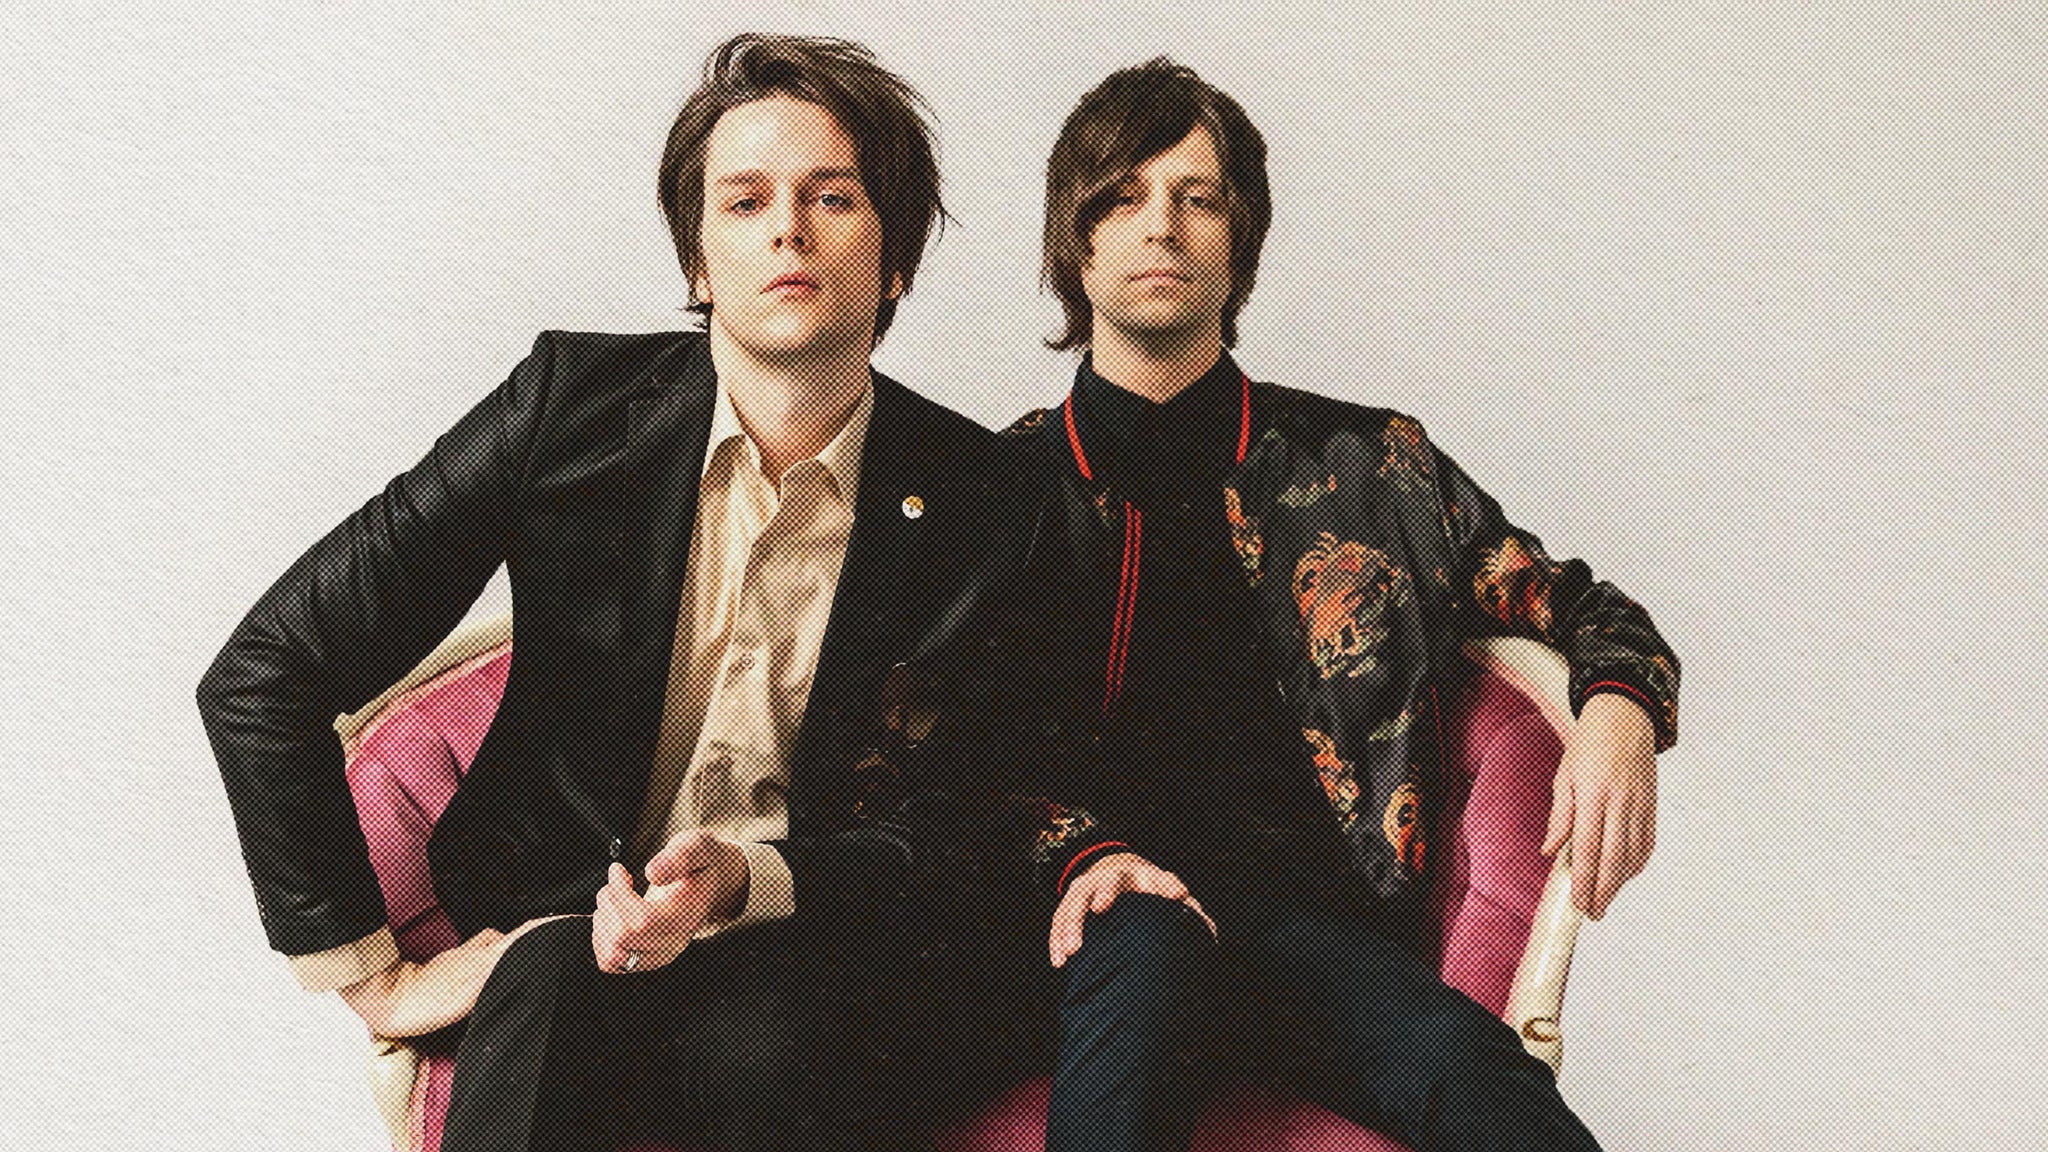 iDKHOW presents The Thought Reform Tour at Jannus Live